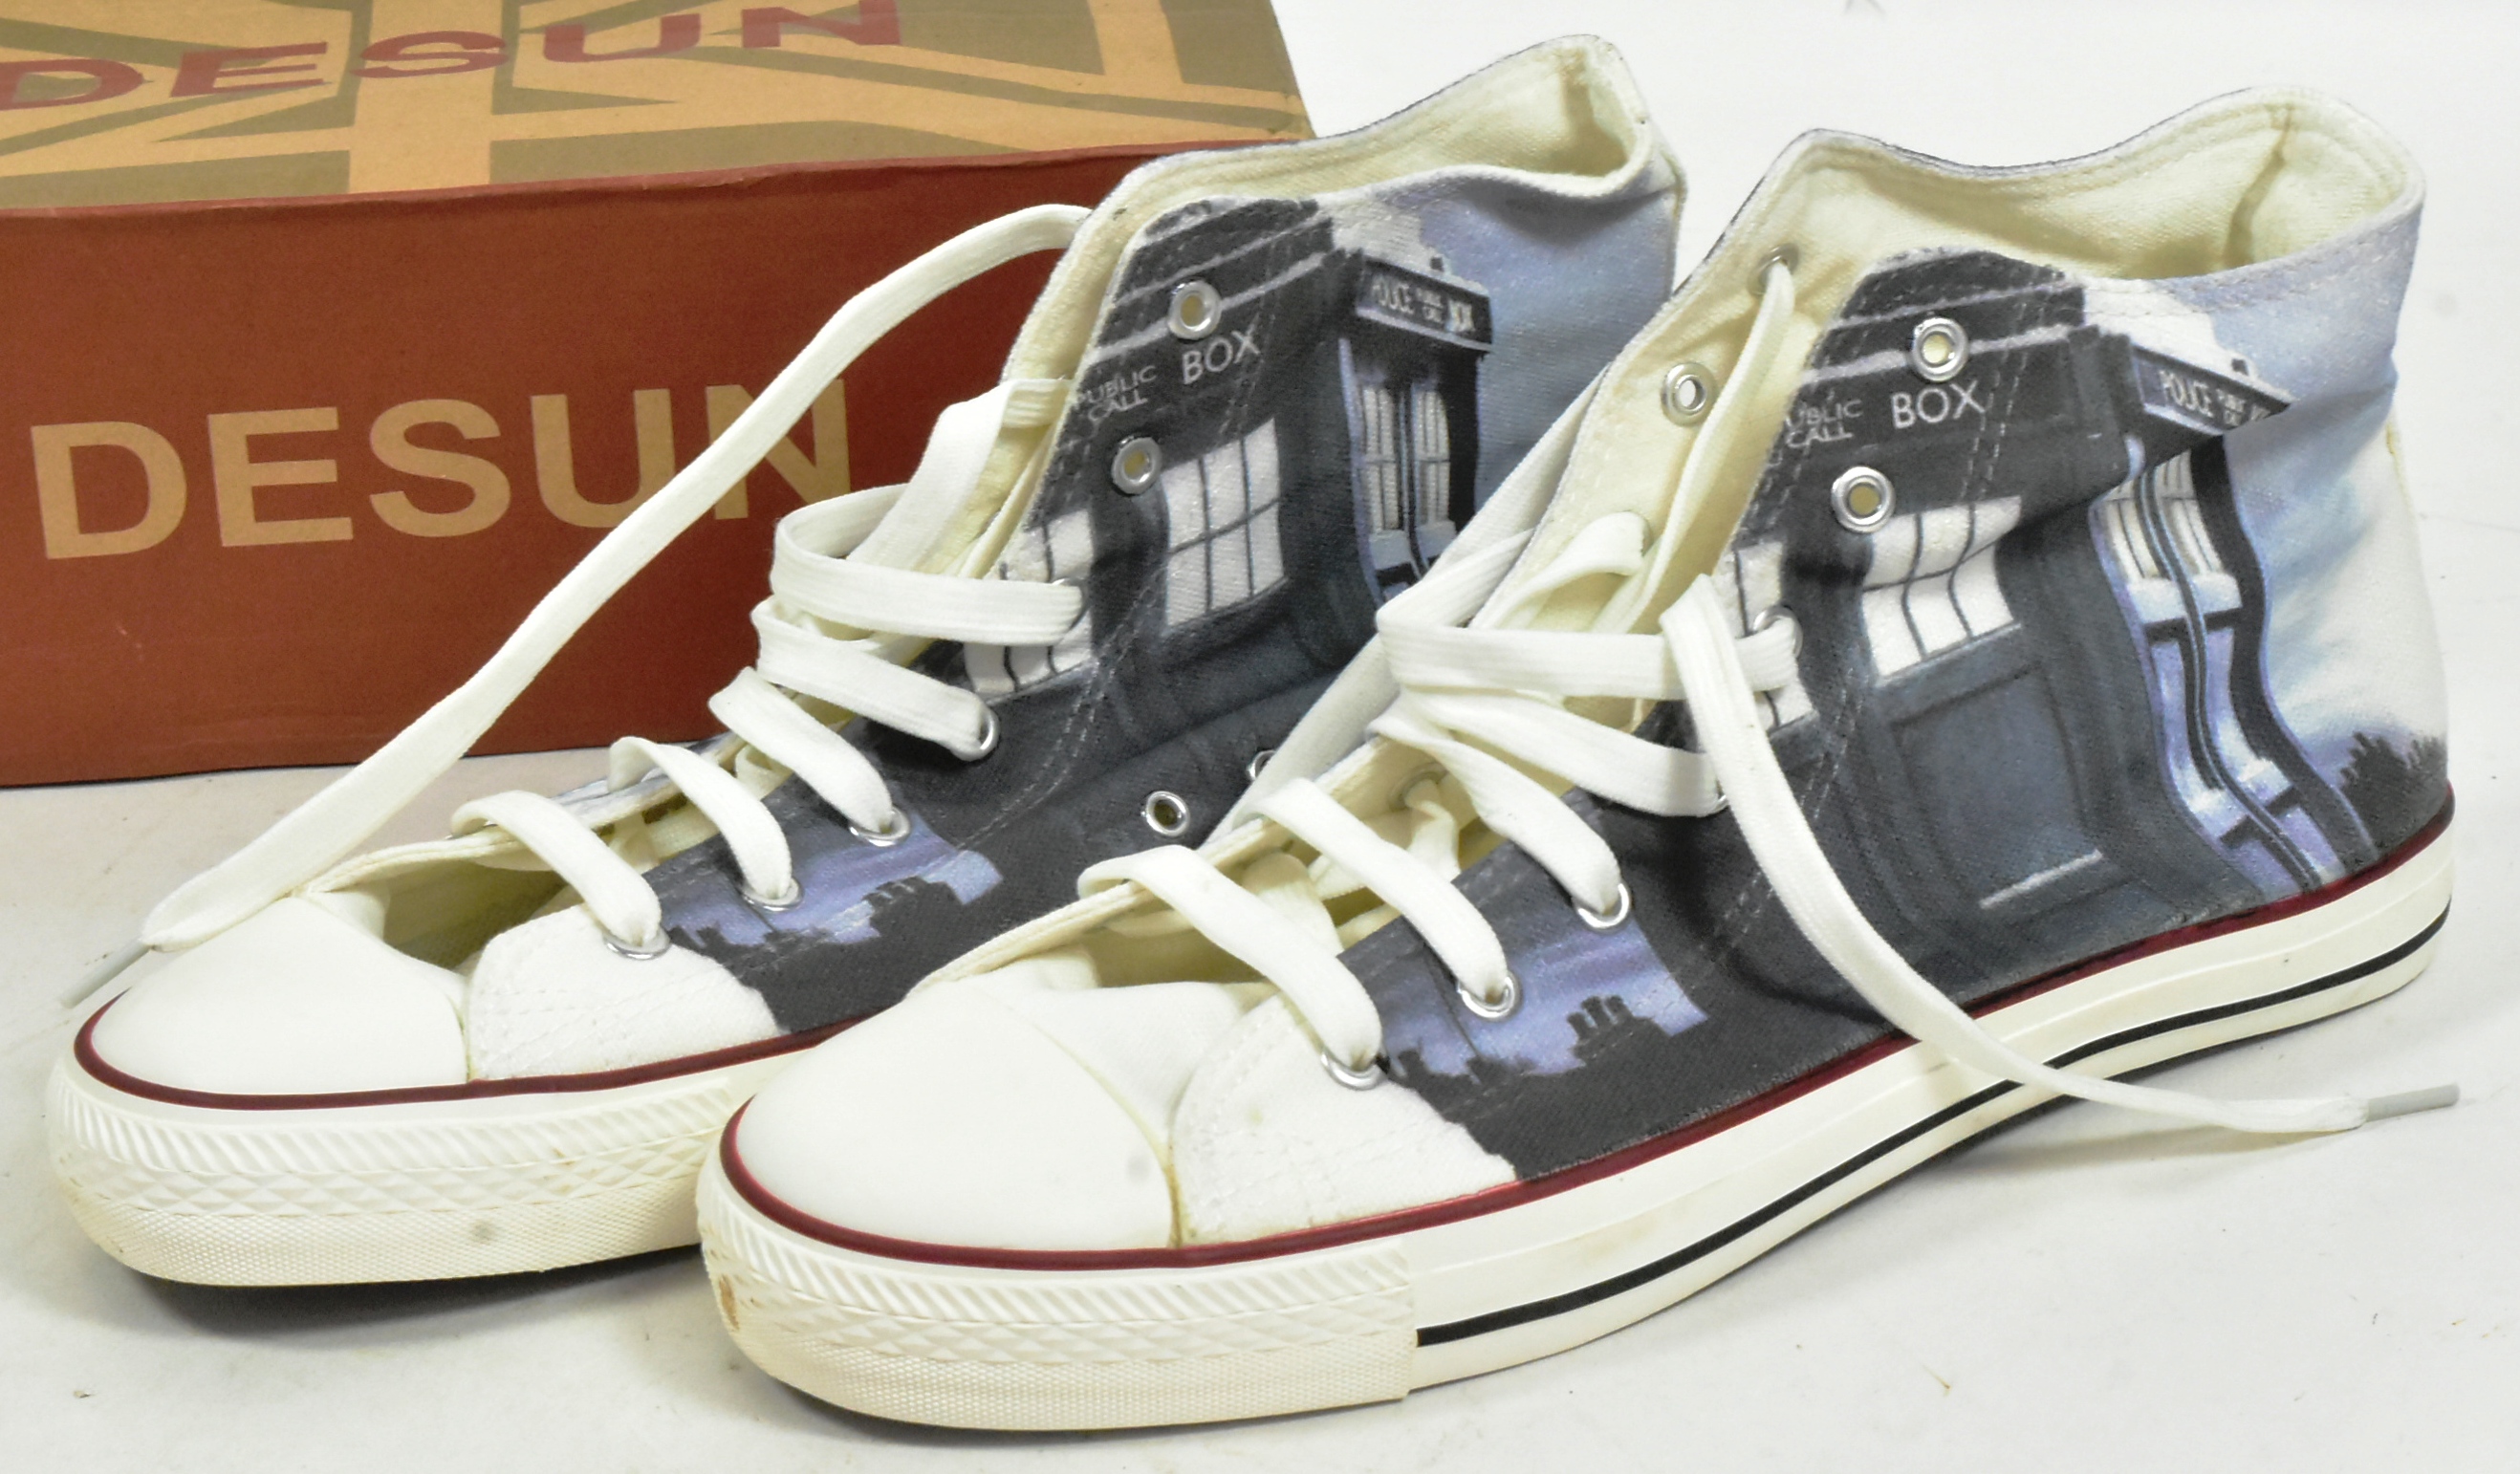 DOCTOR WHO DESUN CONVERSE STYLE HIGH TOP TRAINERS - Image 2 of 6